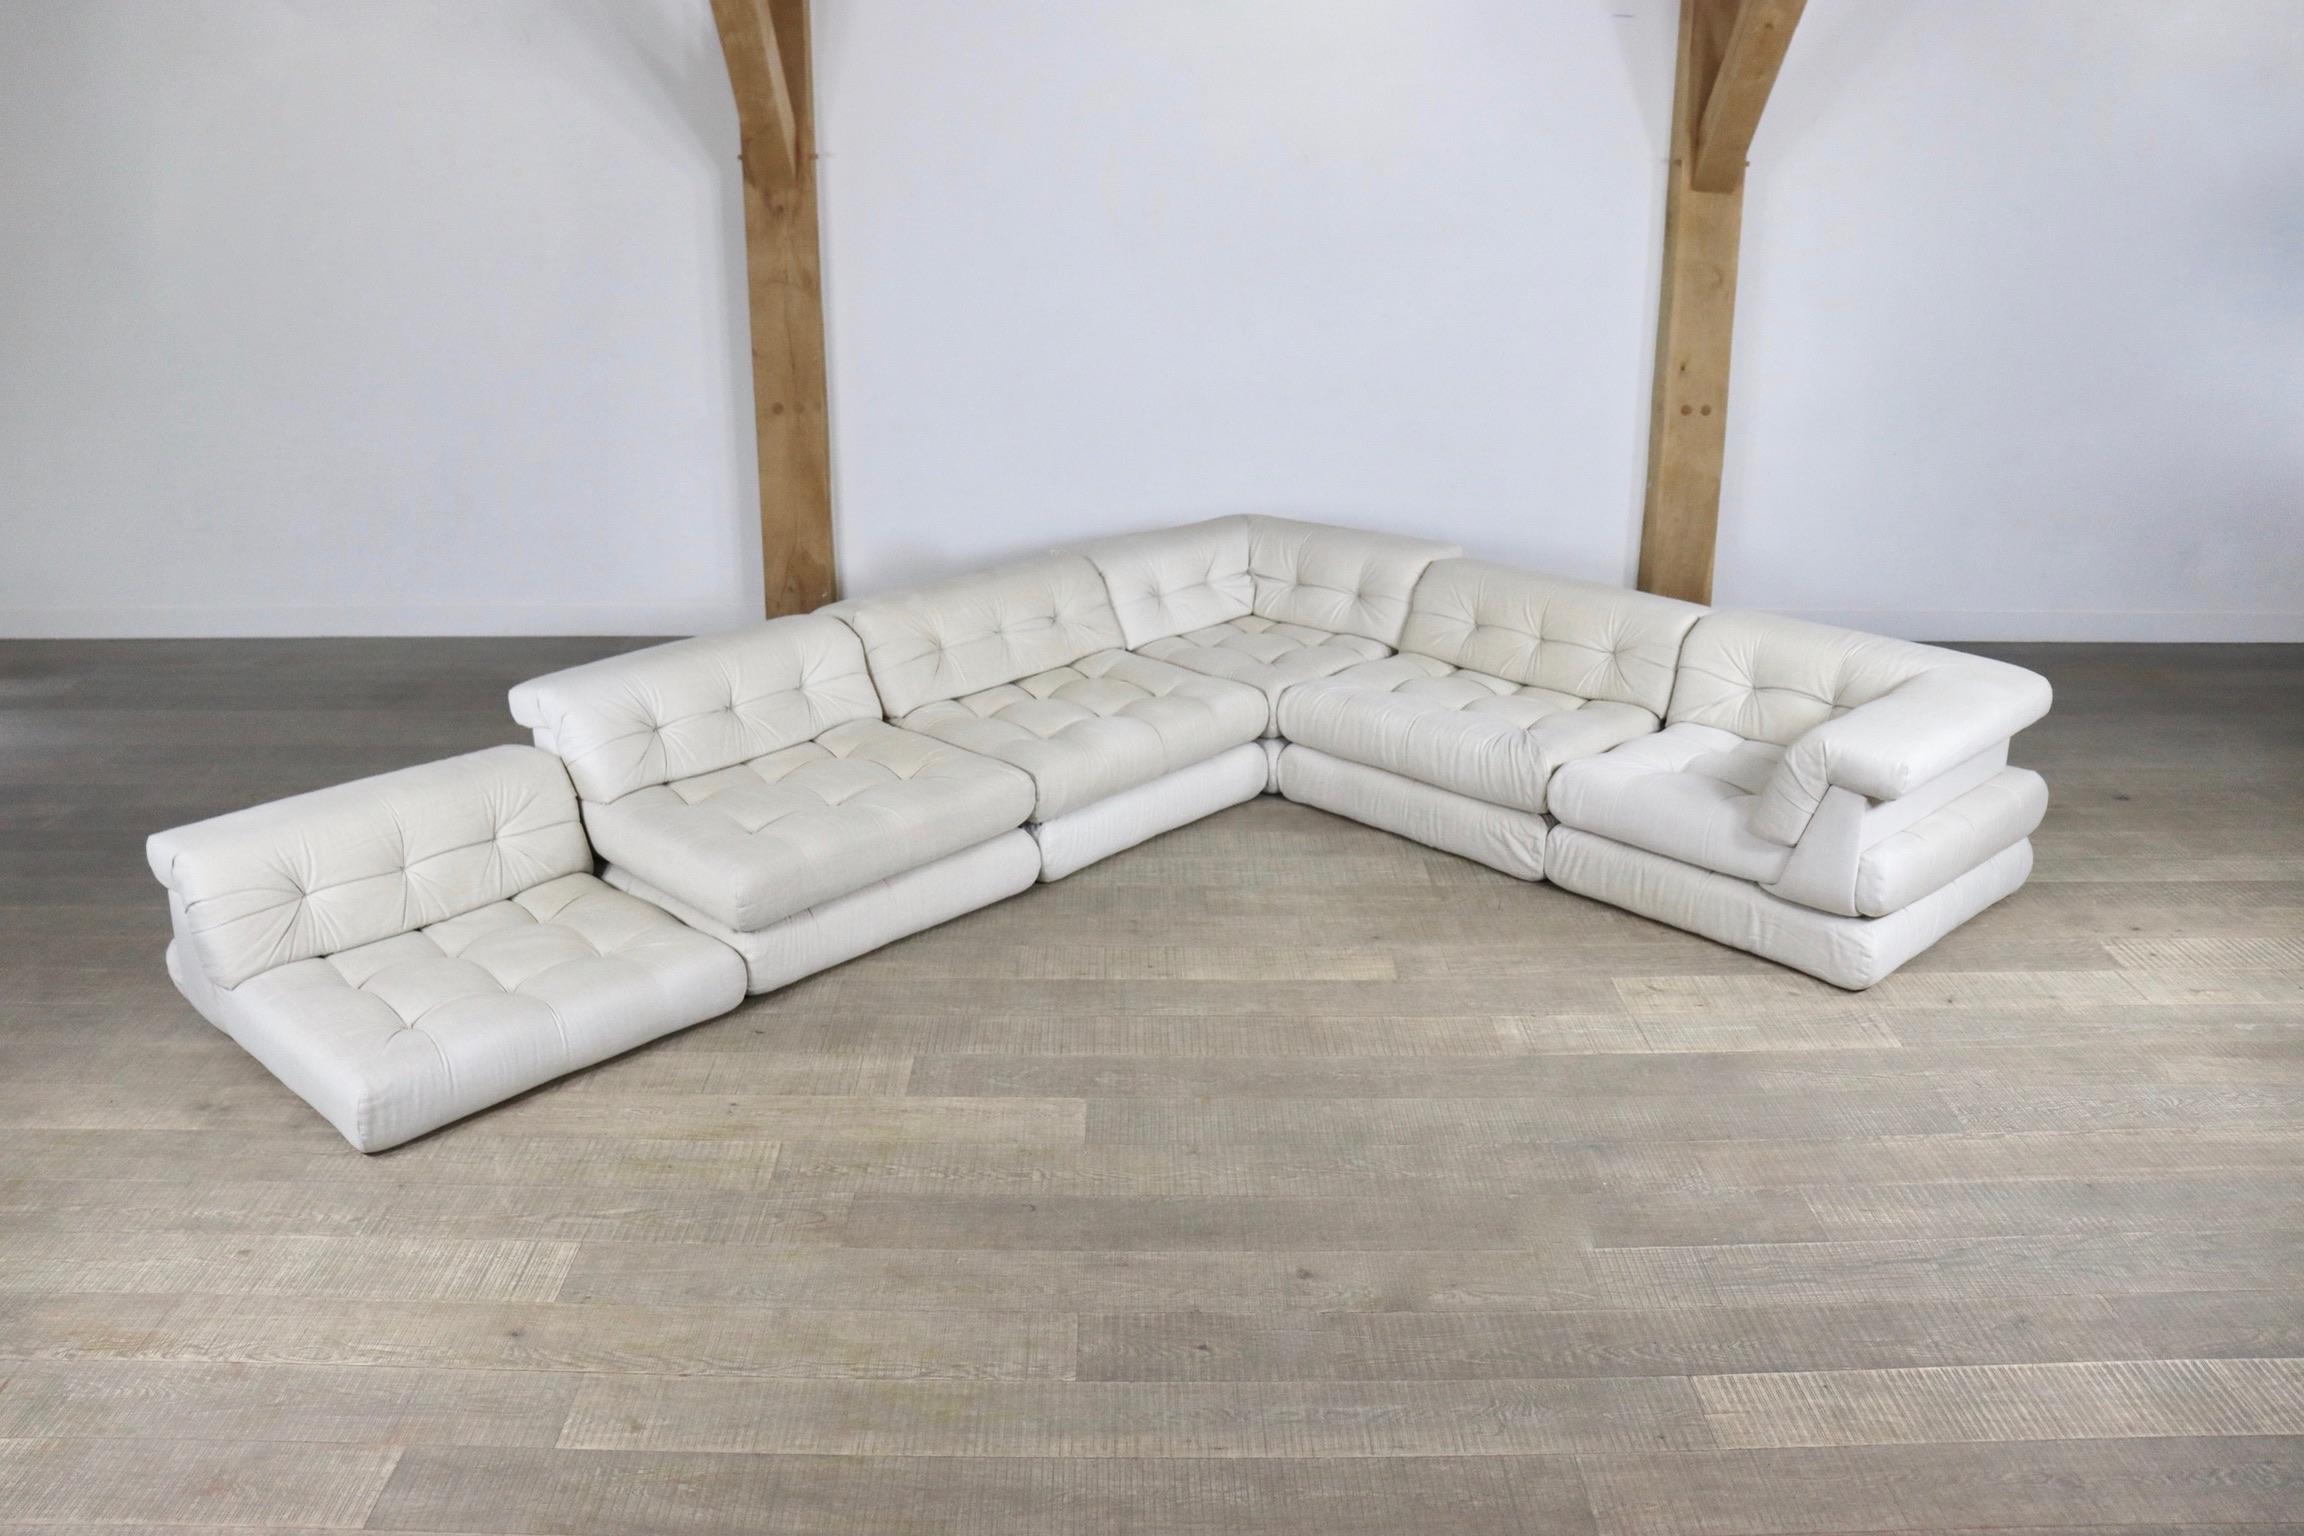 Incredible Roche Bobois first edition Mah Jong modular sofa from the 1970s by Hans Hopfer and Philippe Roche in original white linen upholstery. In the 1970s Hans Hopfer created the Mah Jong lounge sofa, Roche Bobois’s most recognized and iconic